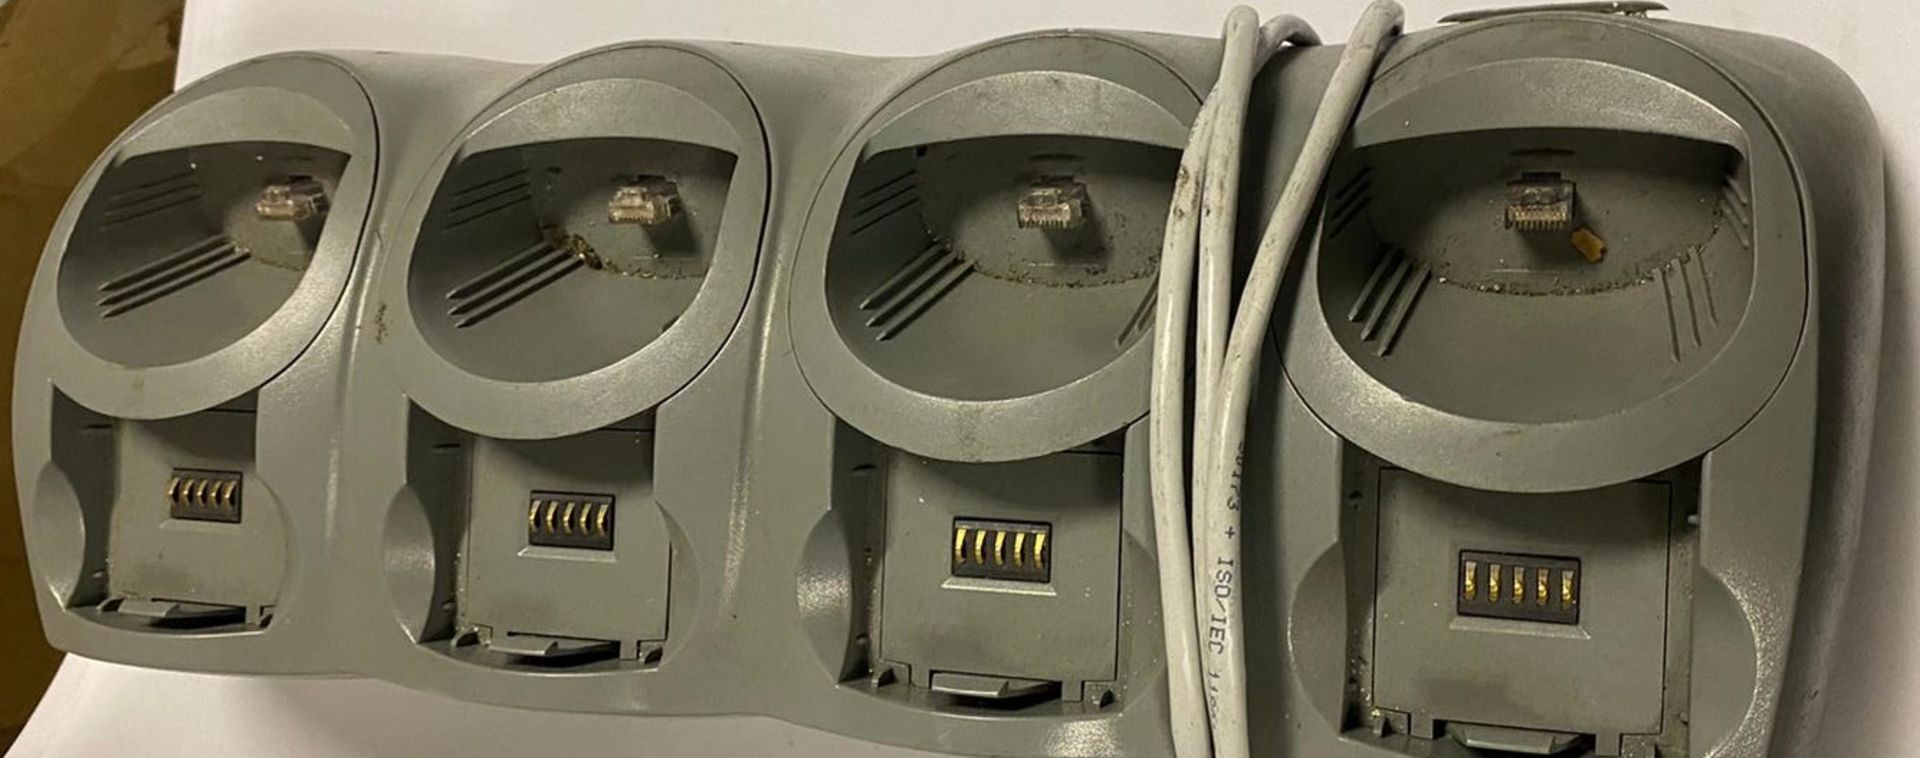 3 x Symbol CRD 6100-4030-000 Quad Slot Cardle Charger - Used Condition - Location: Altrincham WA14 - - Image 2 of 7